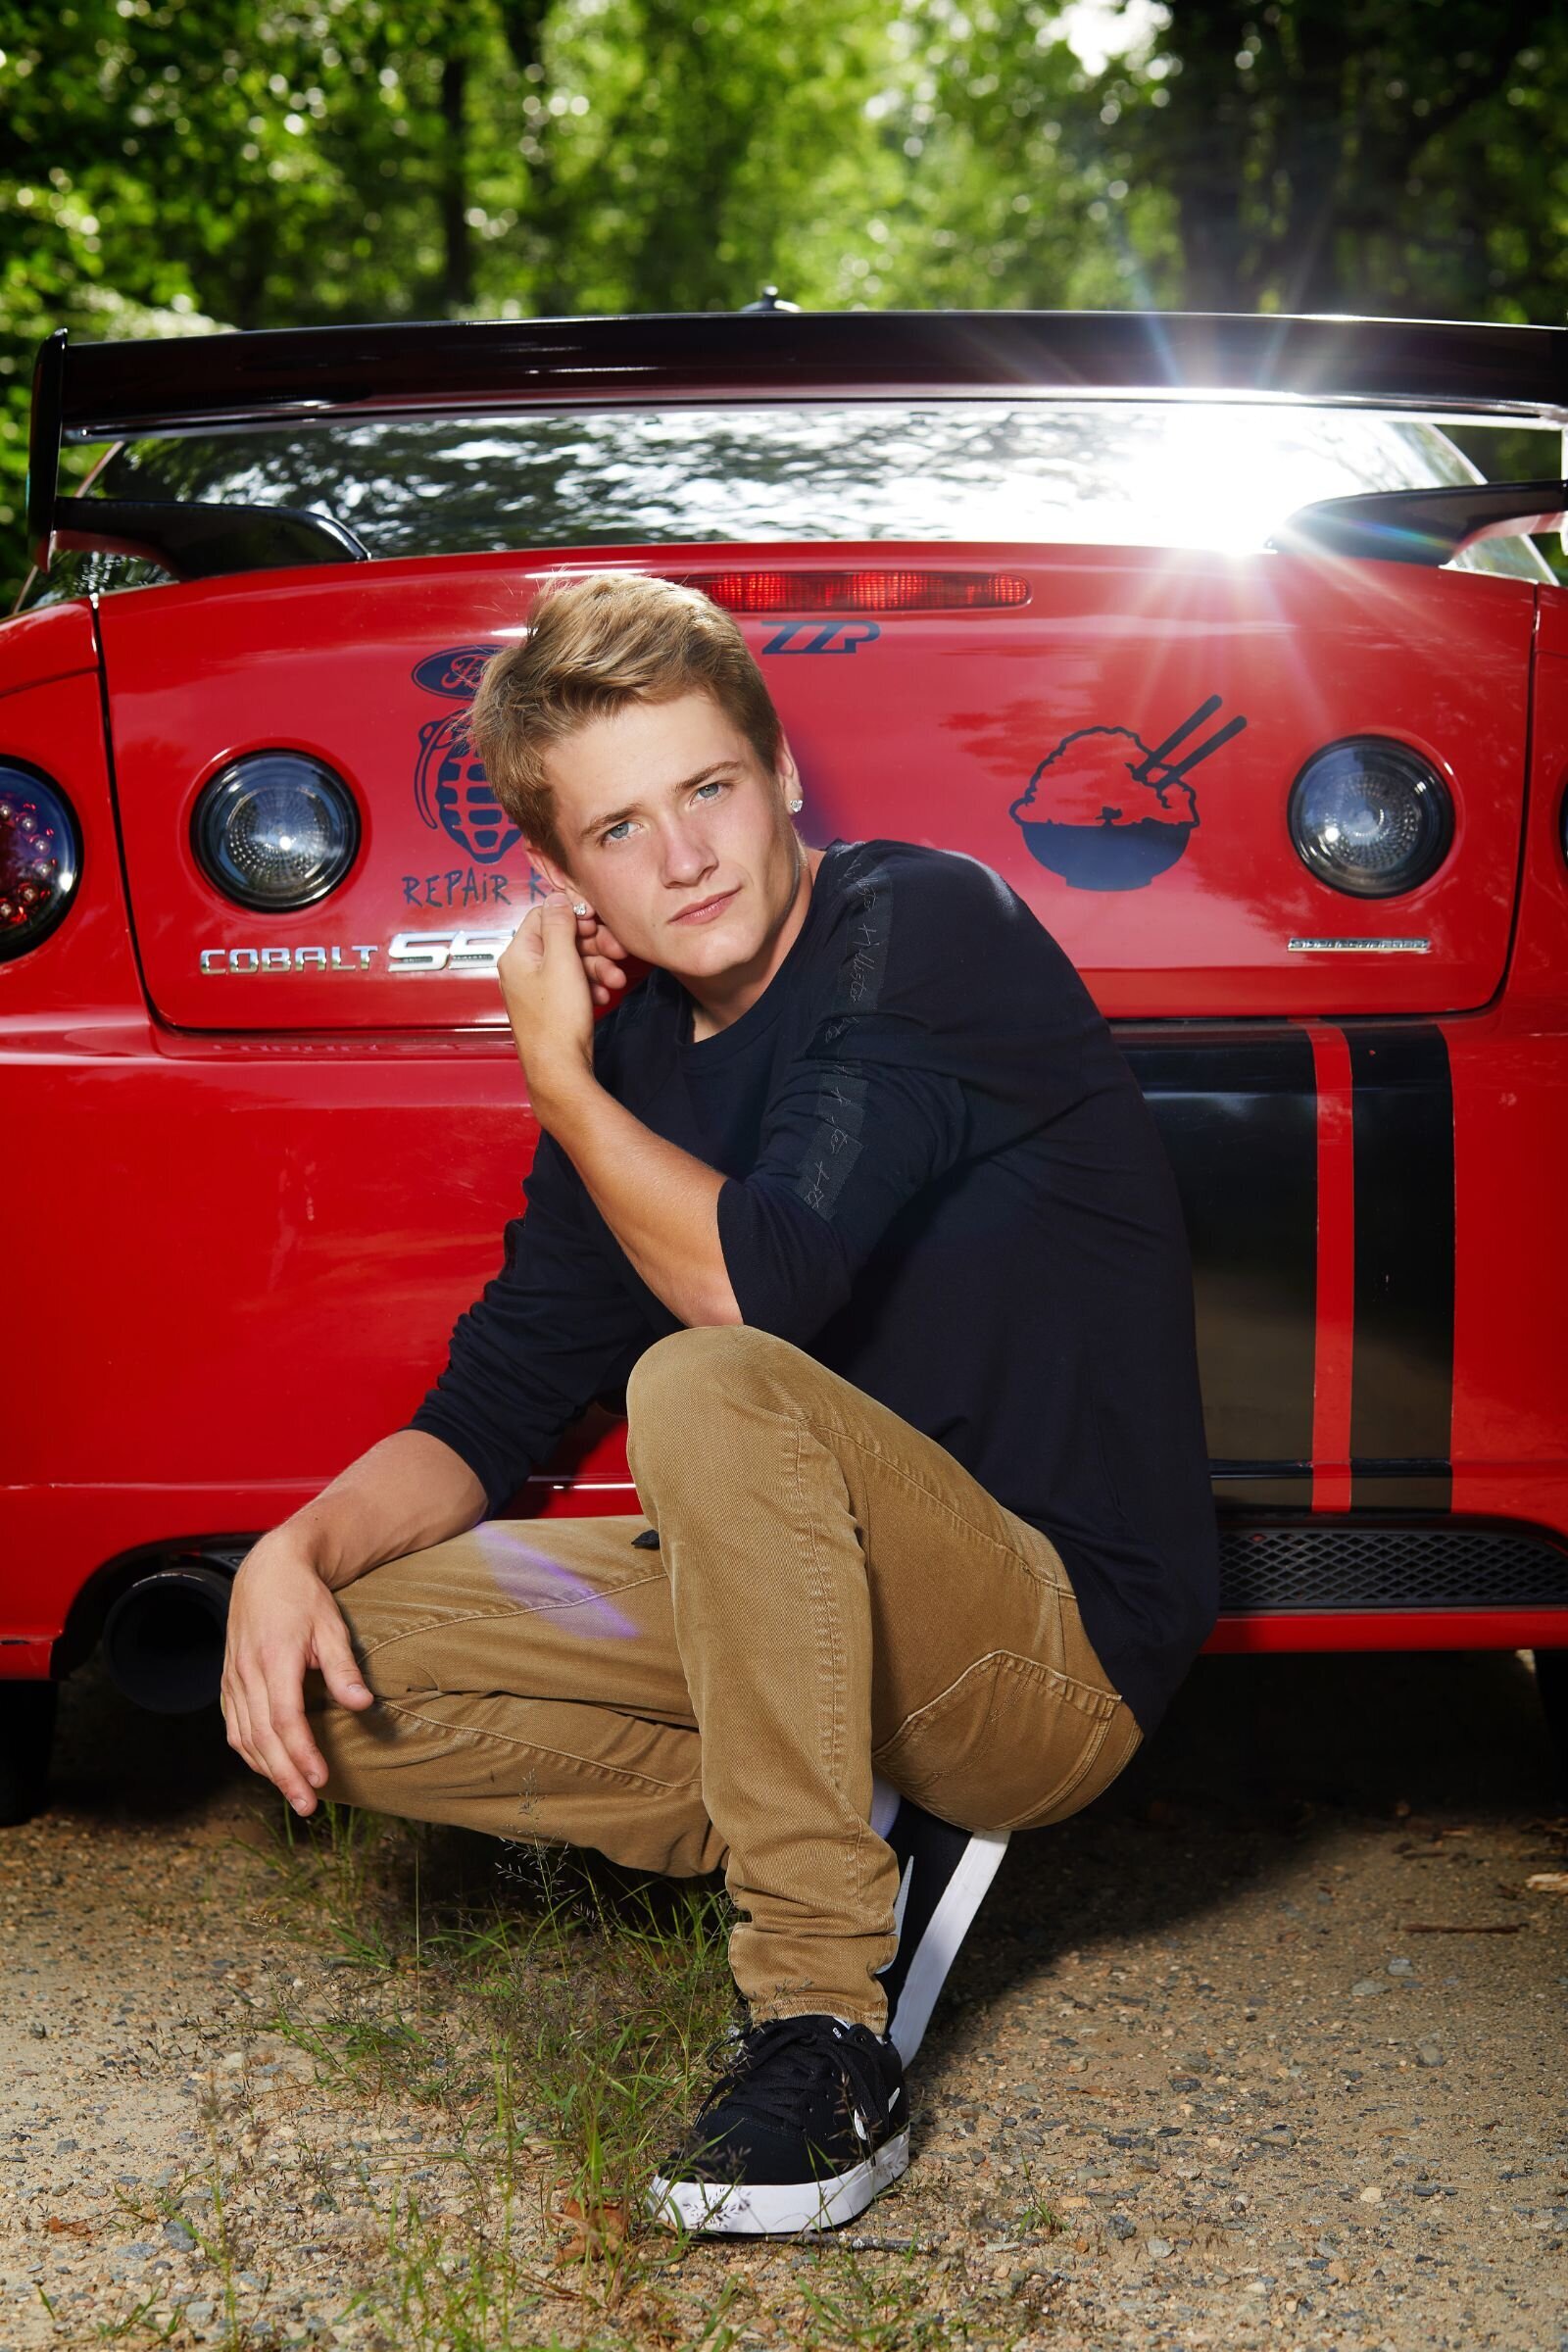 HIgh School senior guy crouching down in front of his red car on a gravel road with a serious expression.